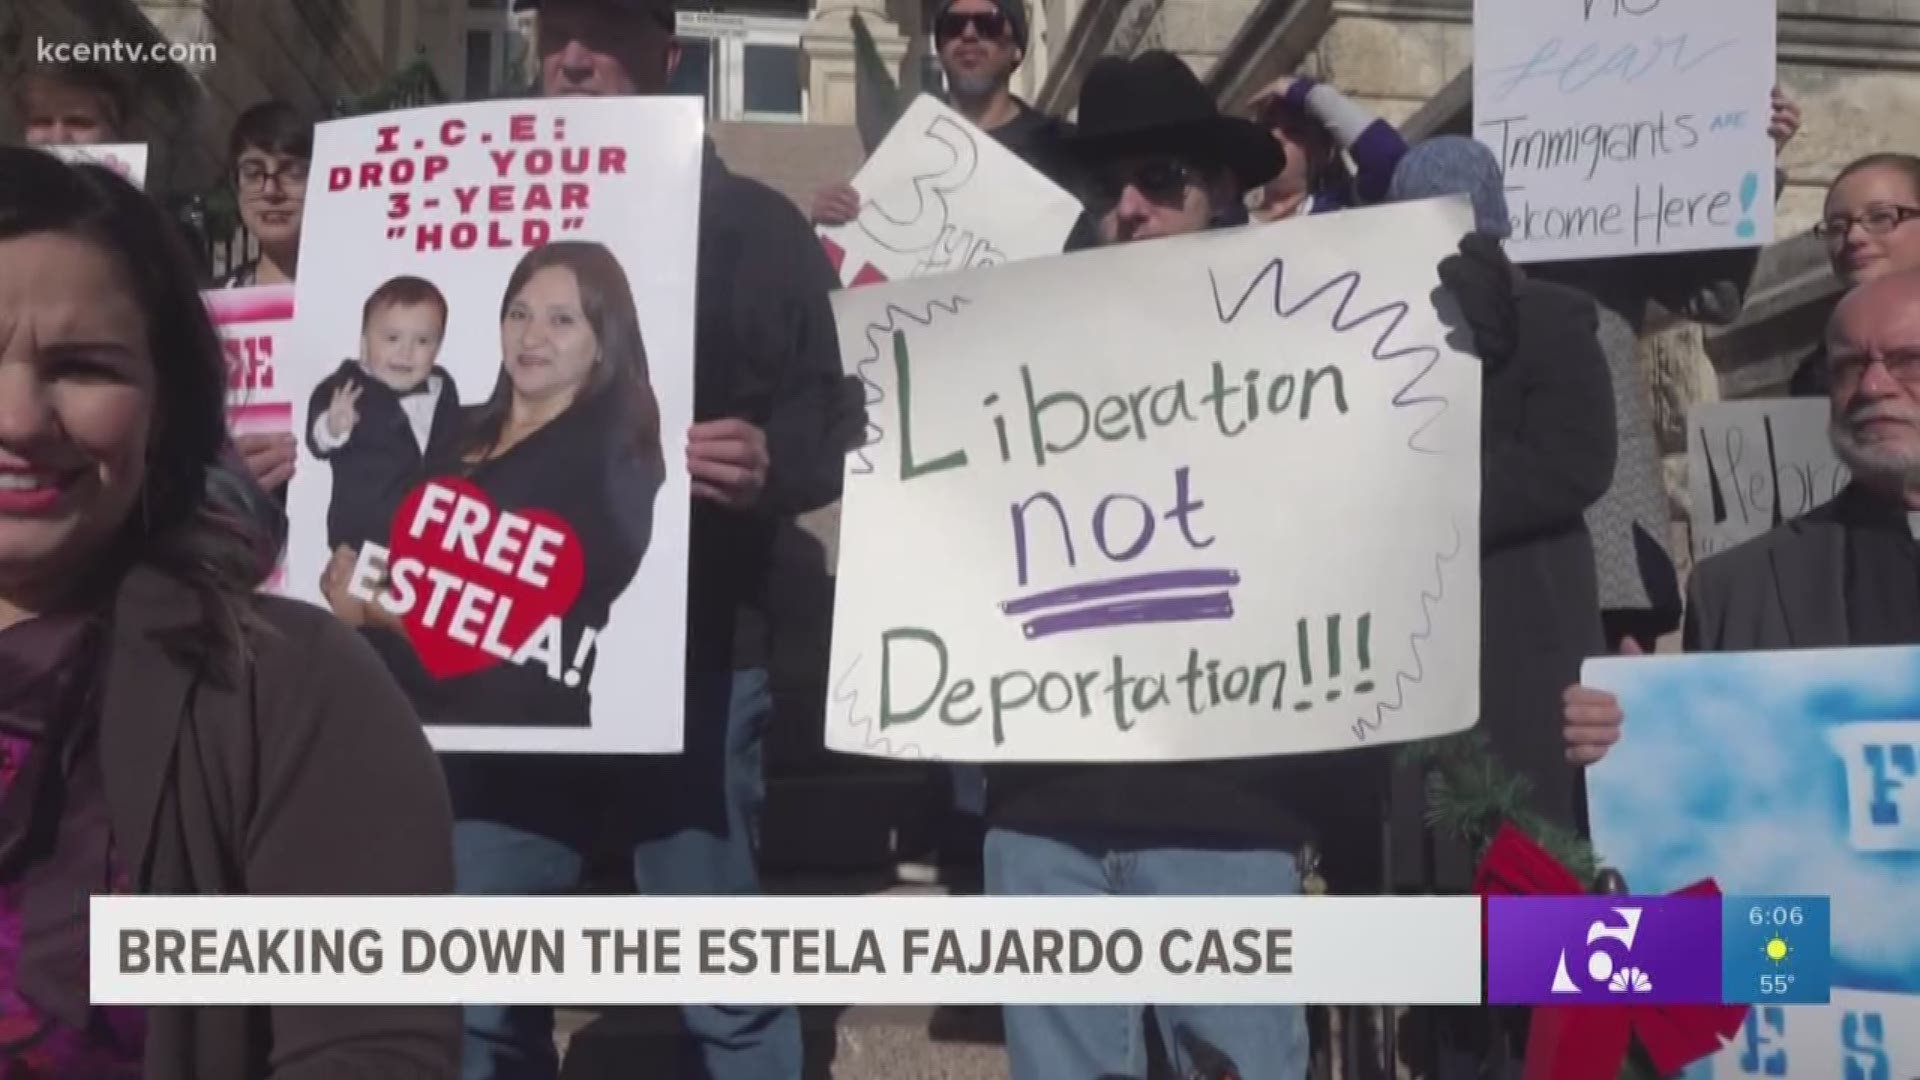 It's a case three years in the making --Estela Fajardo has been in custody for a burglary charge, and recently was released on a PR bond, but afterwards Fajardo was take into ICE's custody.